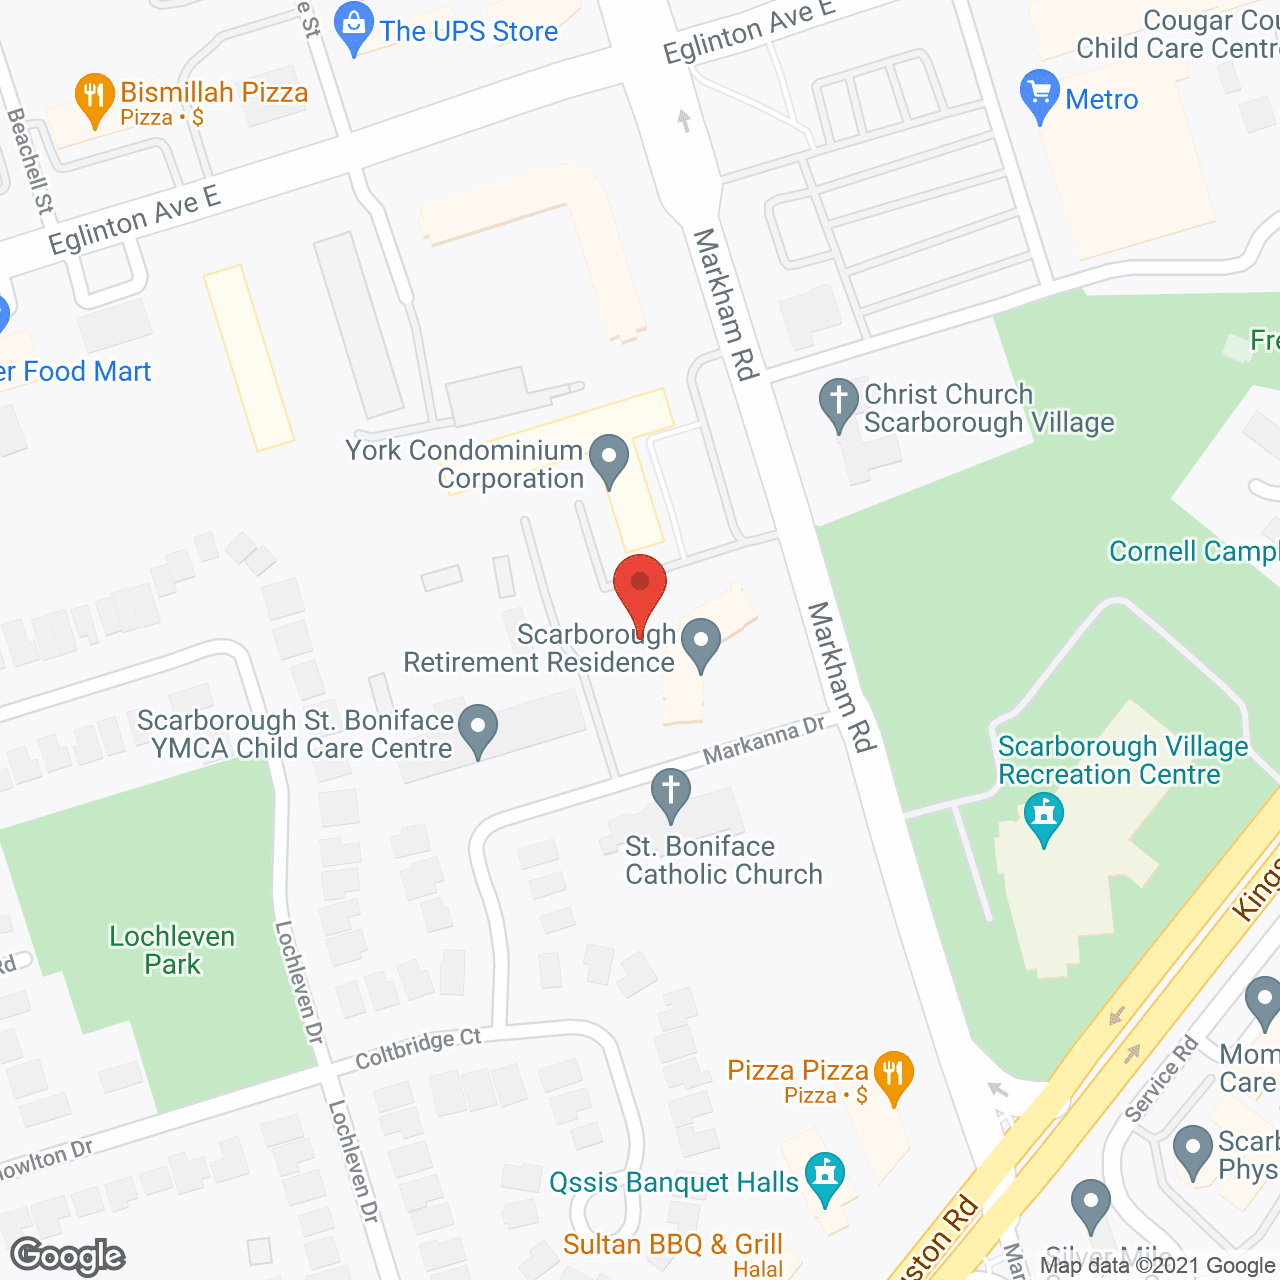 Scarborough Retirement Residence in google map